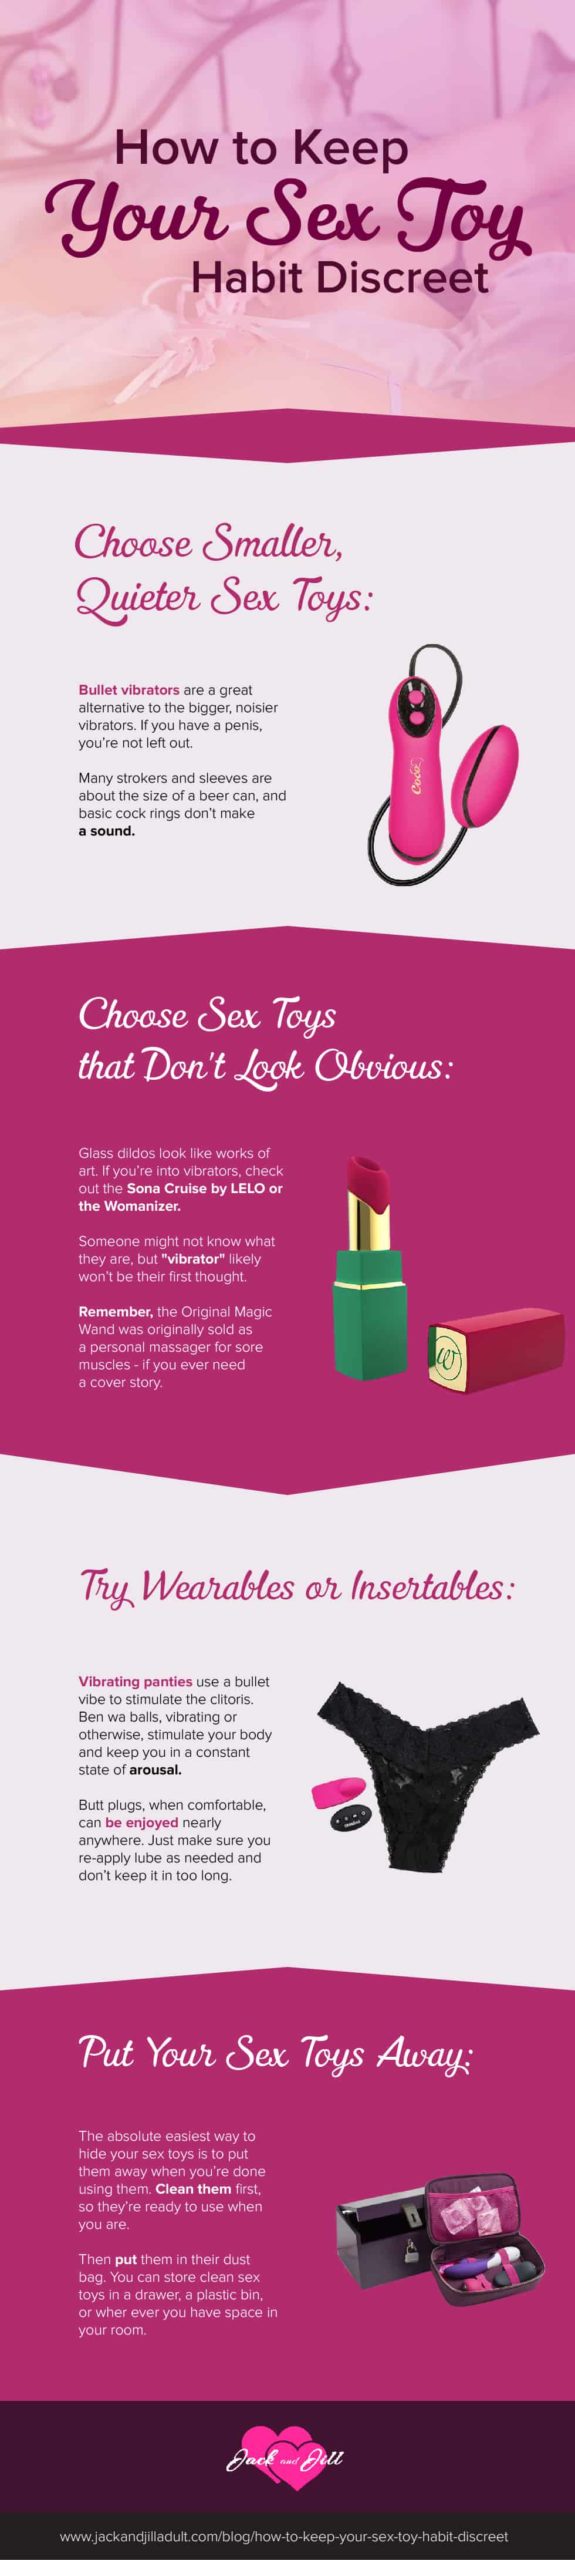 Infographic for How to Keep Your Sex Toy Habit Discreet